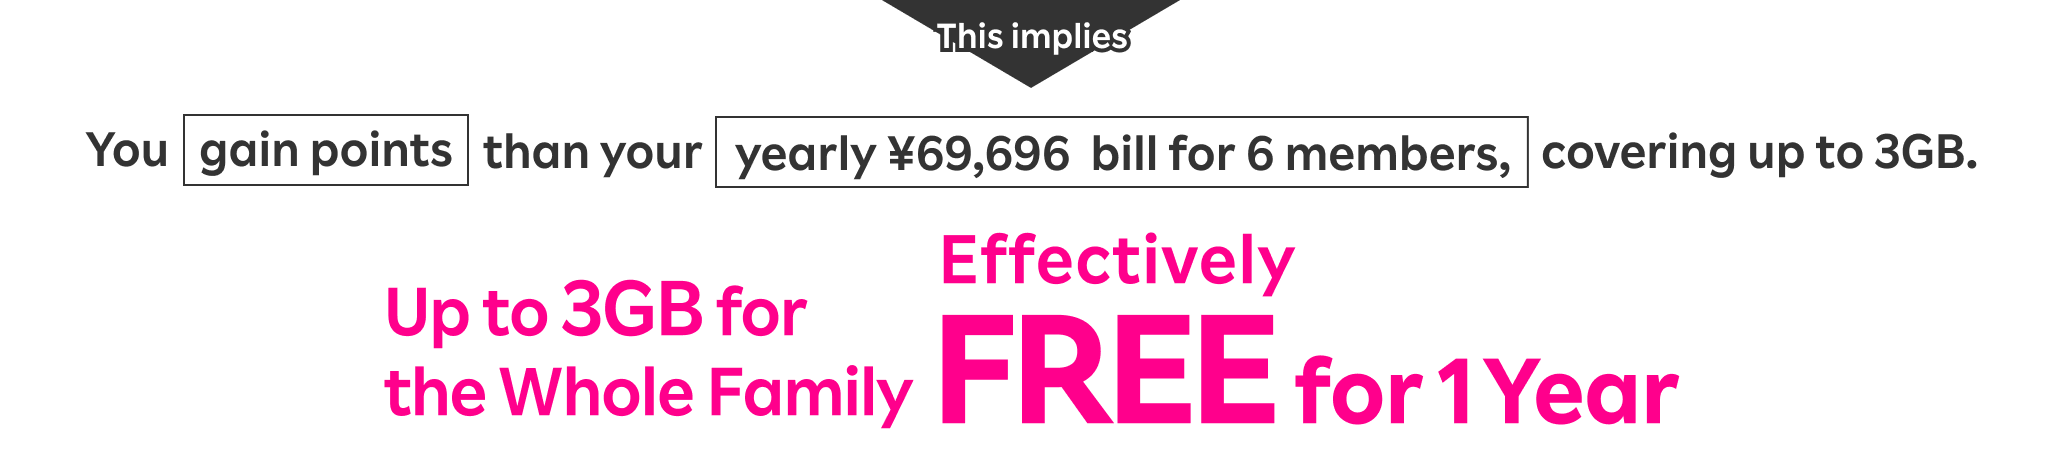 You gain points than your yearly ¥69,696 bill for 6 members, covering up to 3GB. It’s effectively free for the whole family up to 3GB for one year.